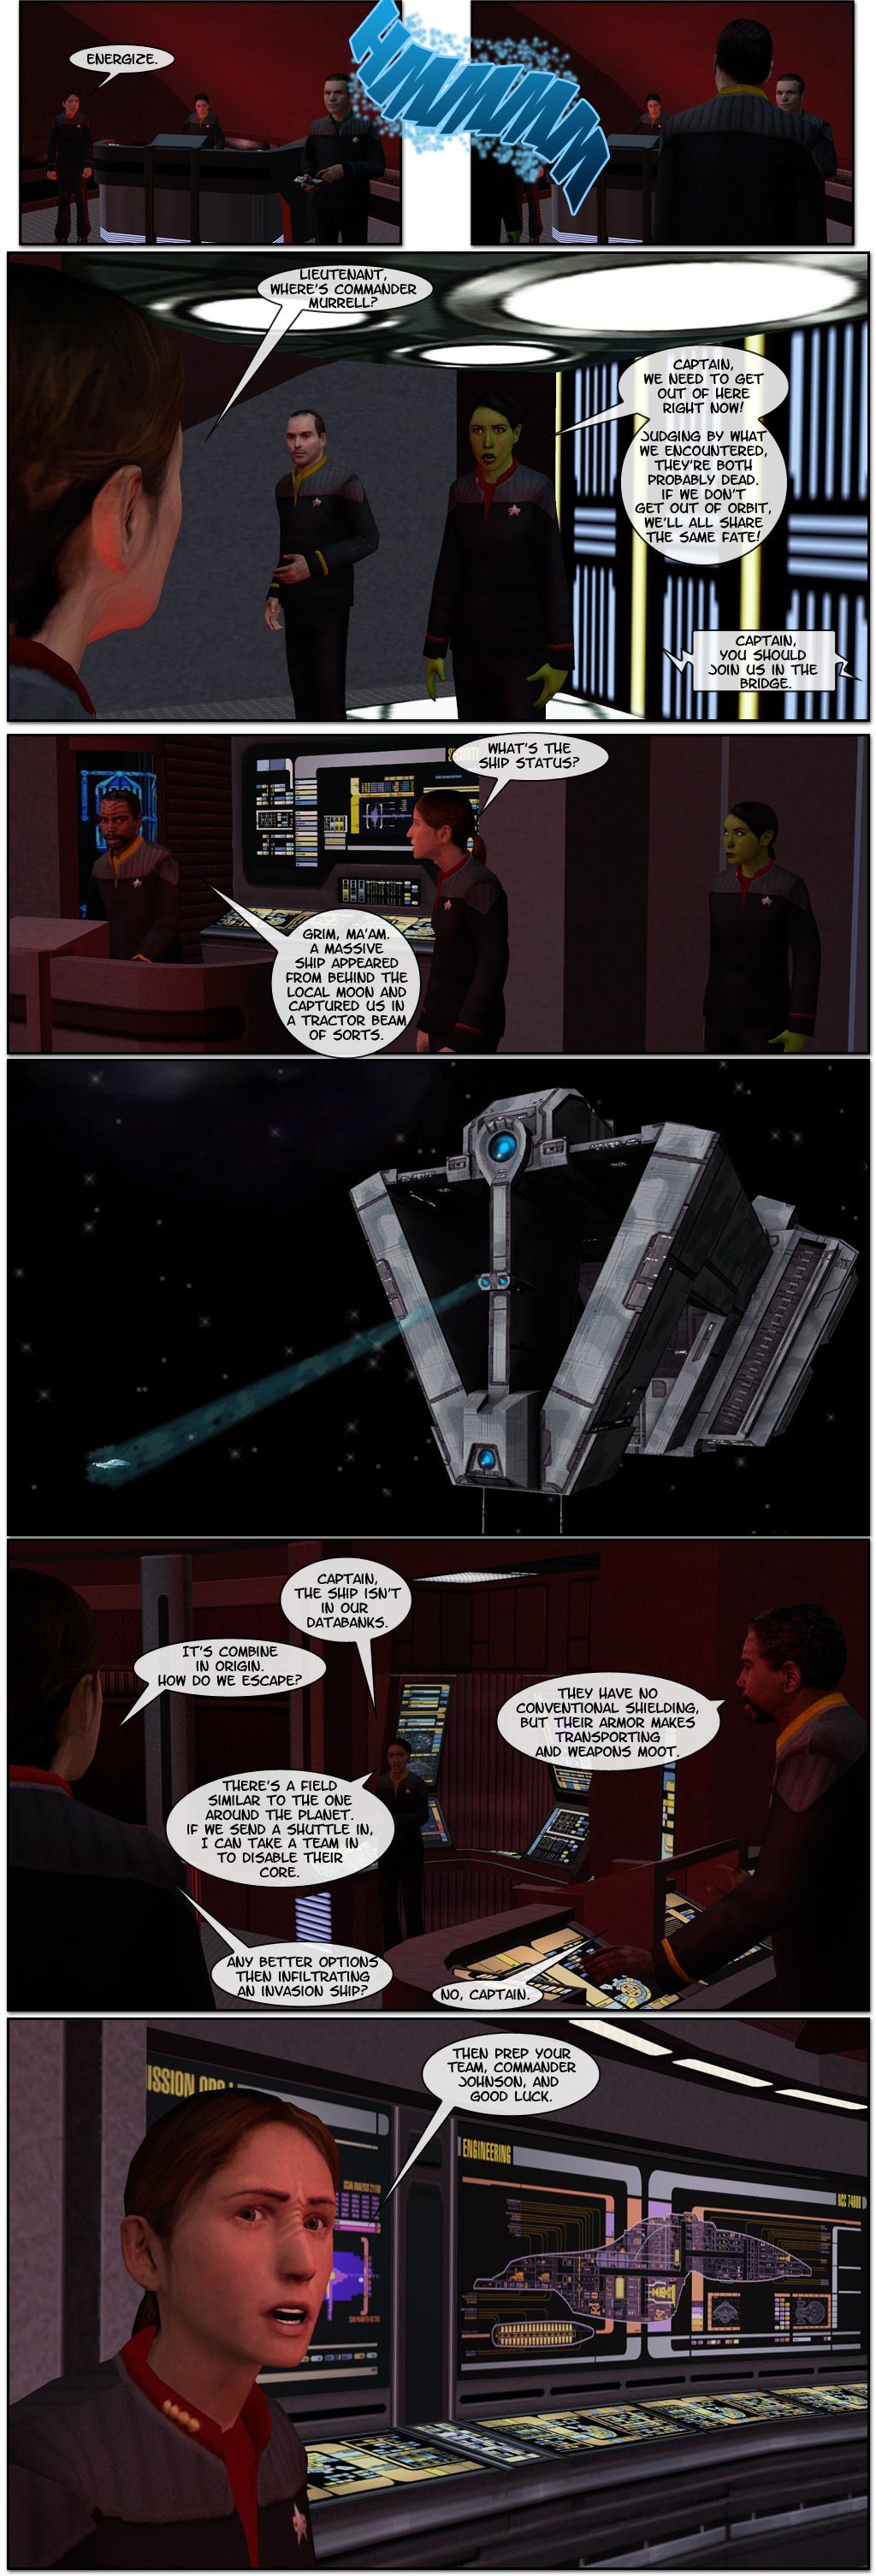 Captain Takir orders the chief to energize the transporter. As the lieutenant and an ensign materialize, Takir asks the lieutenant where Commander Murrell is. The lieutenant retorts that they need to get out of there now and, judging by what they encountered, they’re both probably dead and if they don’t get out of orbit, they’ll all share the same fate. An officer calls the Captain to join them in the bridge. As Captain Takir arrives, she asks for the ship’s status. An officer replies that it’s grim, a massive ship appeared from behind the local moon and captured them in a tractor beam of sorts. Another officer, Johnson, reports that the ship isn’t in their databanks. Takir clarifies it’s Combine in origin and asks how do they escape. The other officer tells her they have no conventional shielding, but their amor makes transporting and weapons moot. Johnson states there’s a field similar to the one around the planet and if they send a shuttle in, she can take a team in to disable their core. Takir asks if there are any better options than infiltrating an invasion ship, to which the ensign tells her no. Captain Takir tells Johnson to prep her team and good luck.